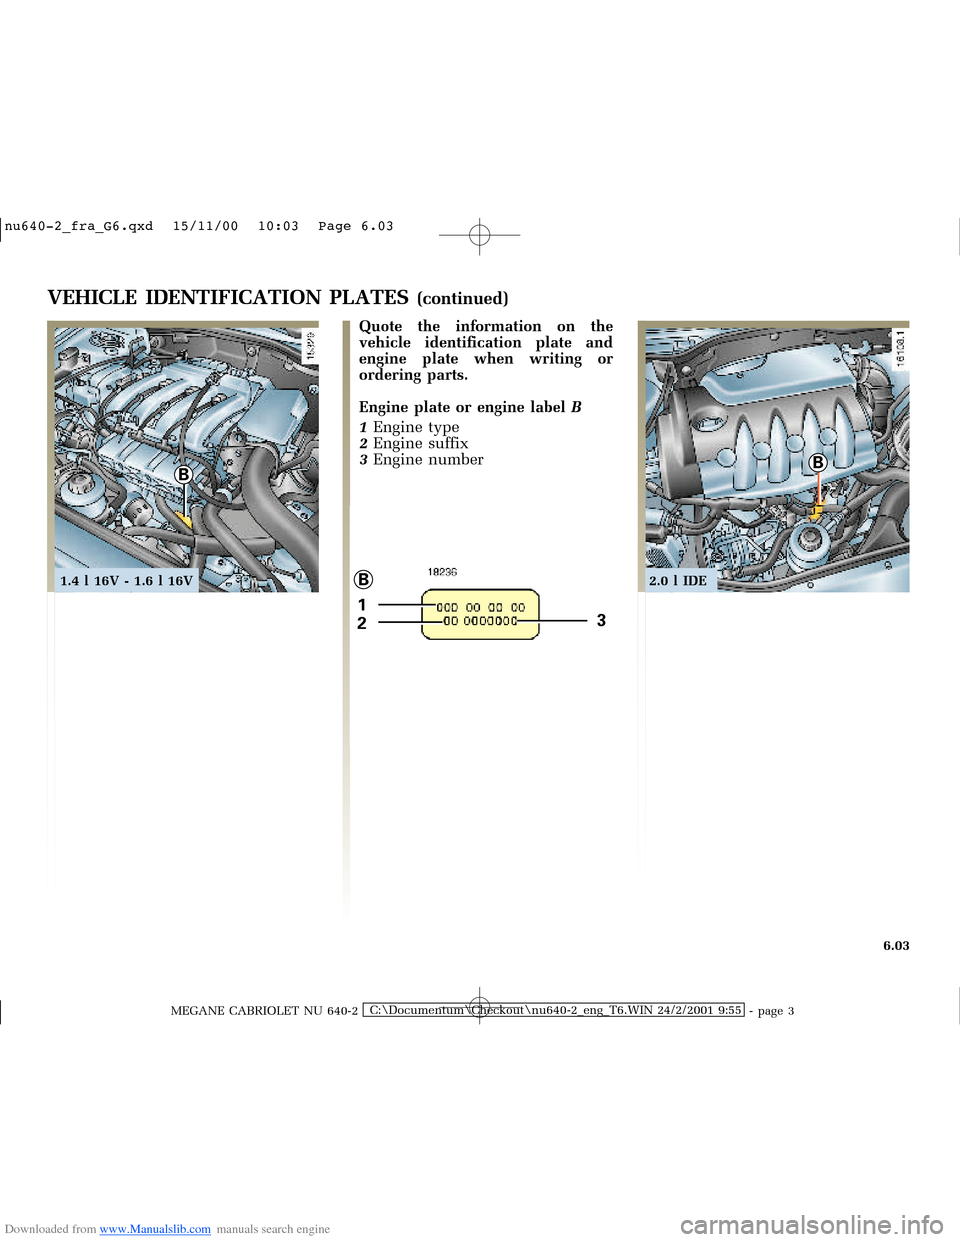 RENAULT MEGANE 2000 X64 / 1.G Owners Manual Downloaded from www.Manualslib.com manuals search engine BB
1
23
B
�Q�X������B�I�U�D�B�*���T�[�G� � ��������� � ������ � �3�D�J�H� ����
MEGANE CABRIOLET NU 640-2C:\Docum